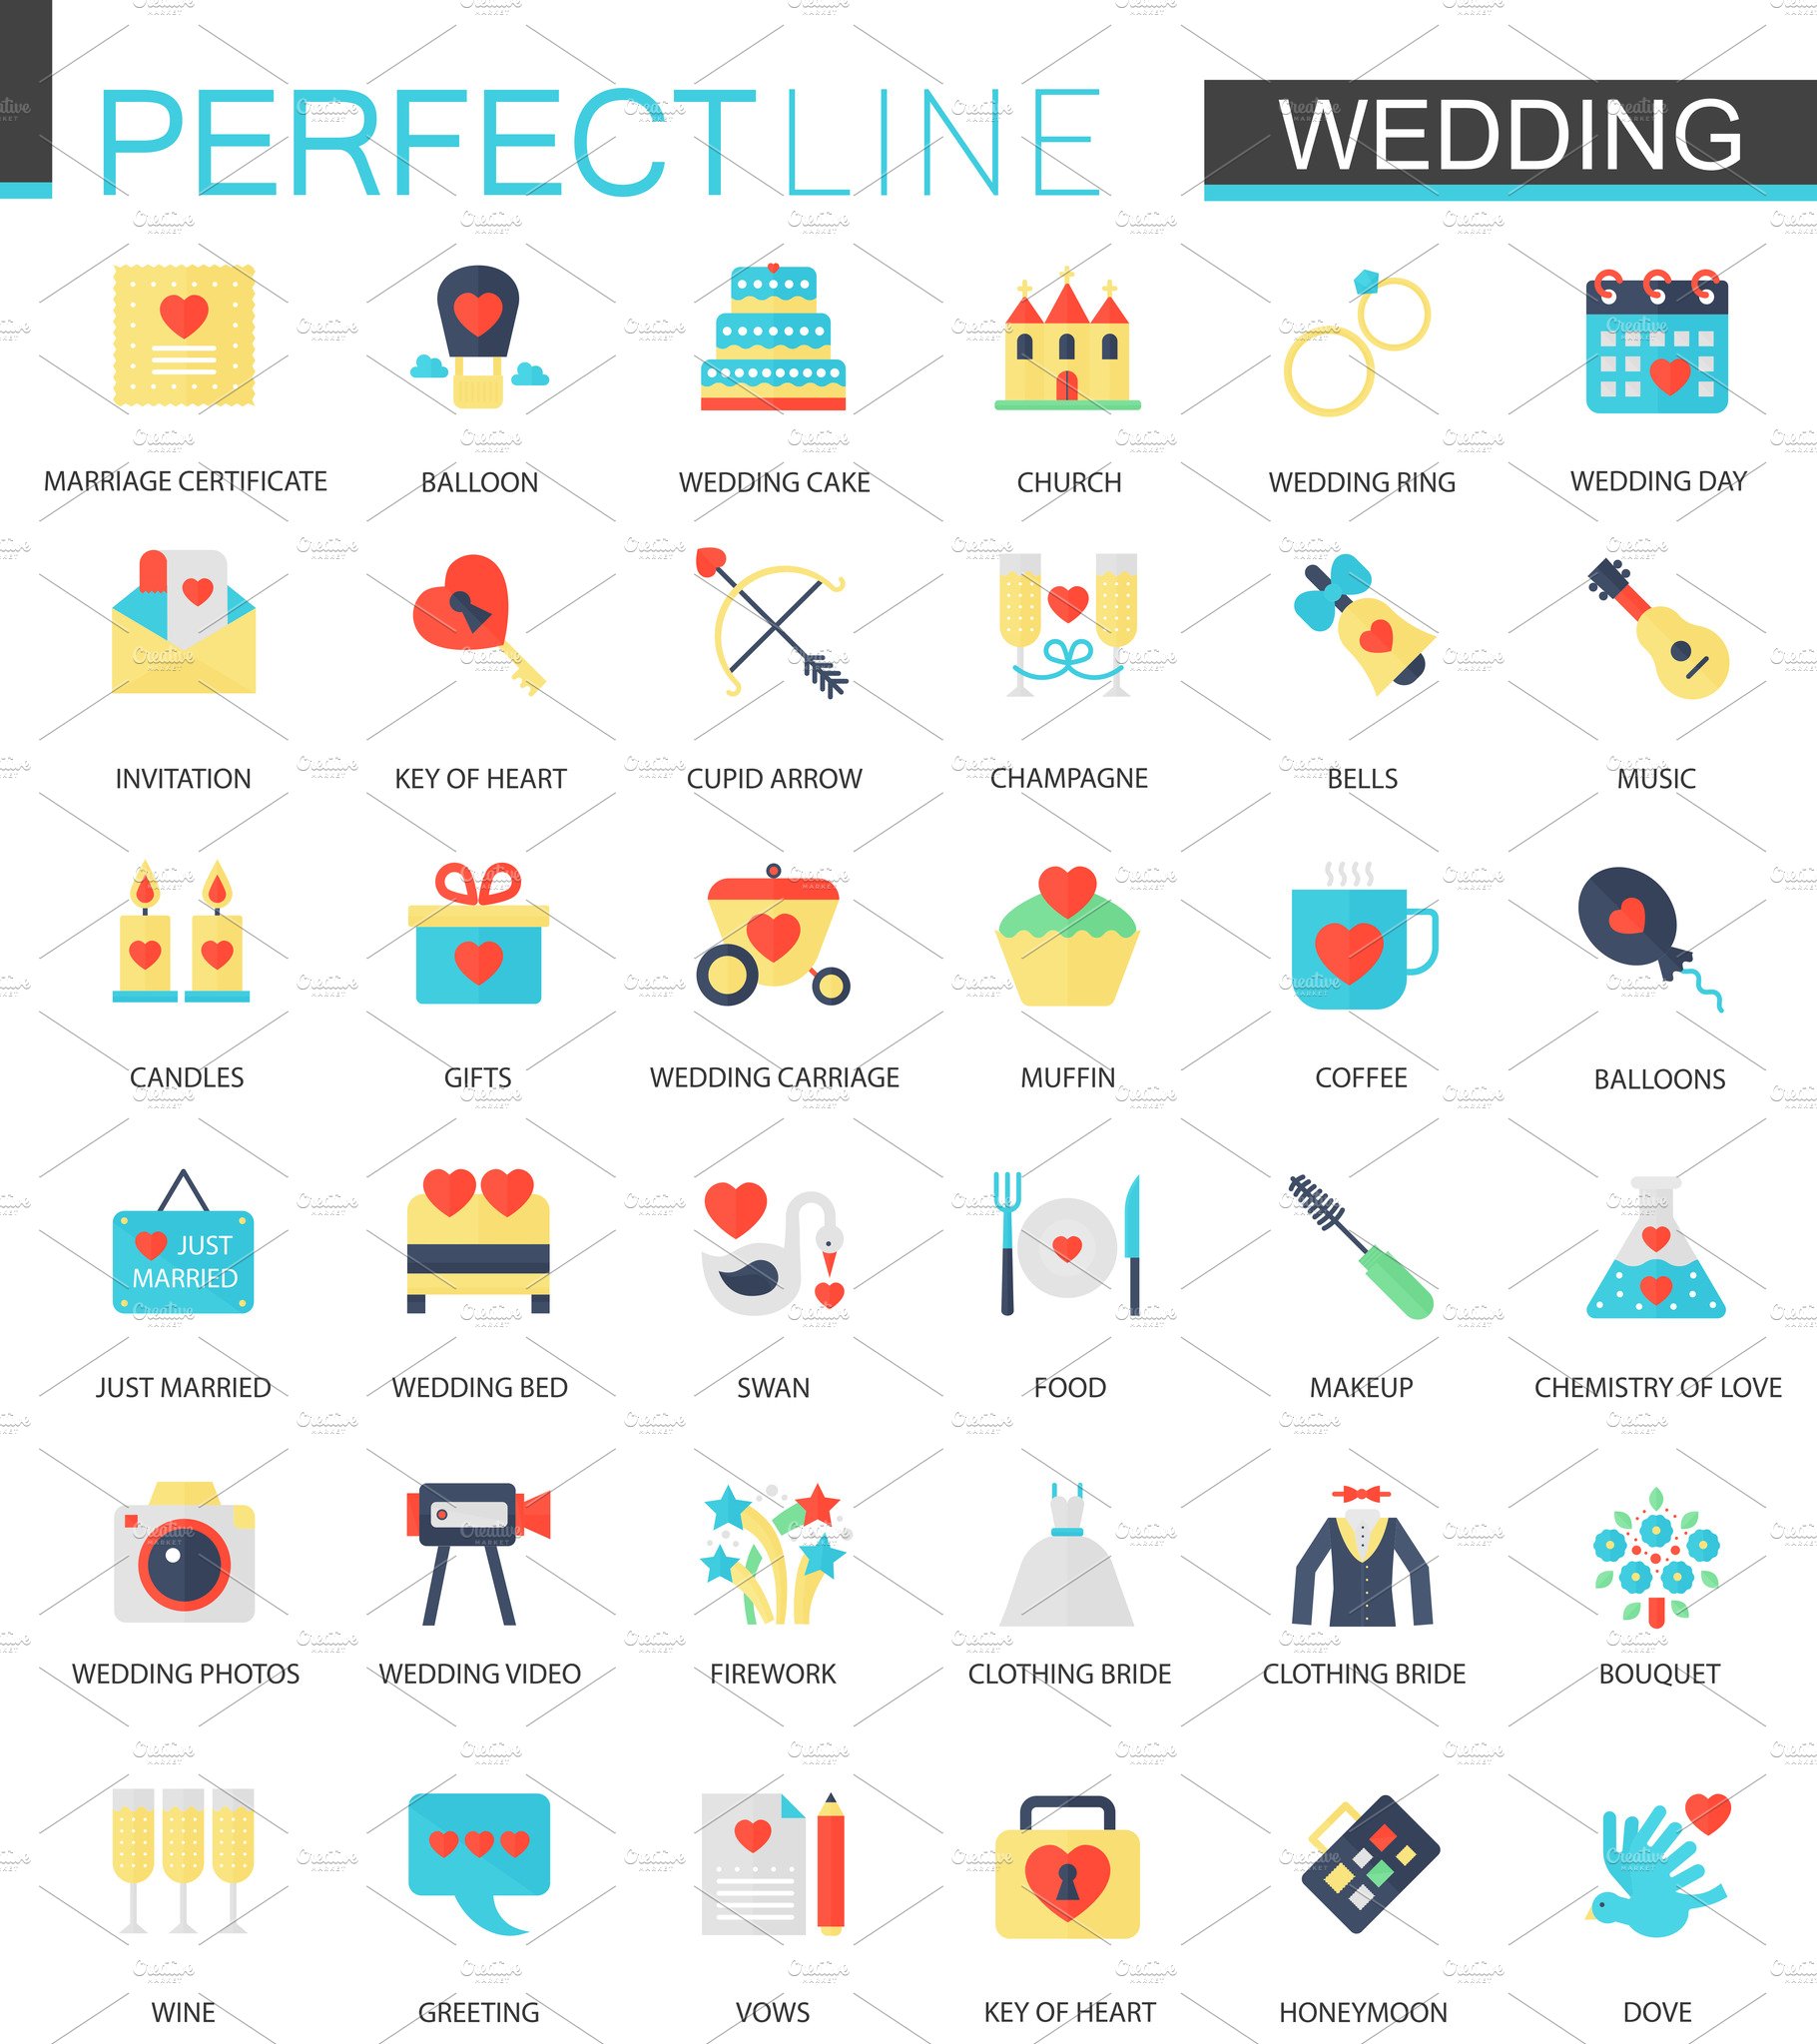 Wedding icons isolated. cover image.